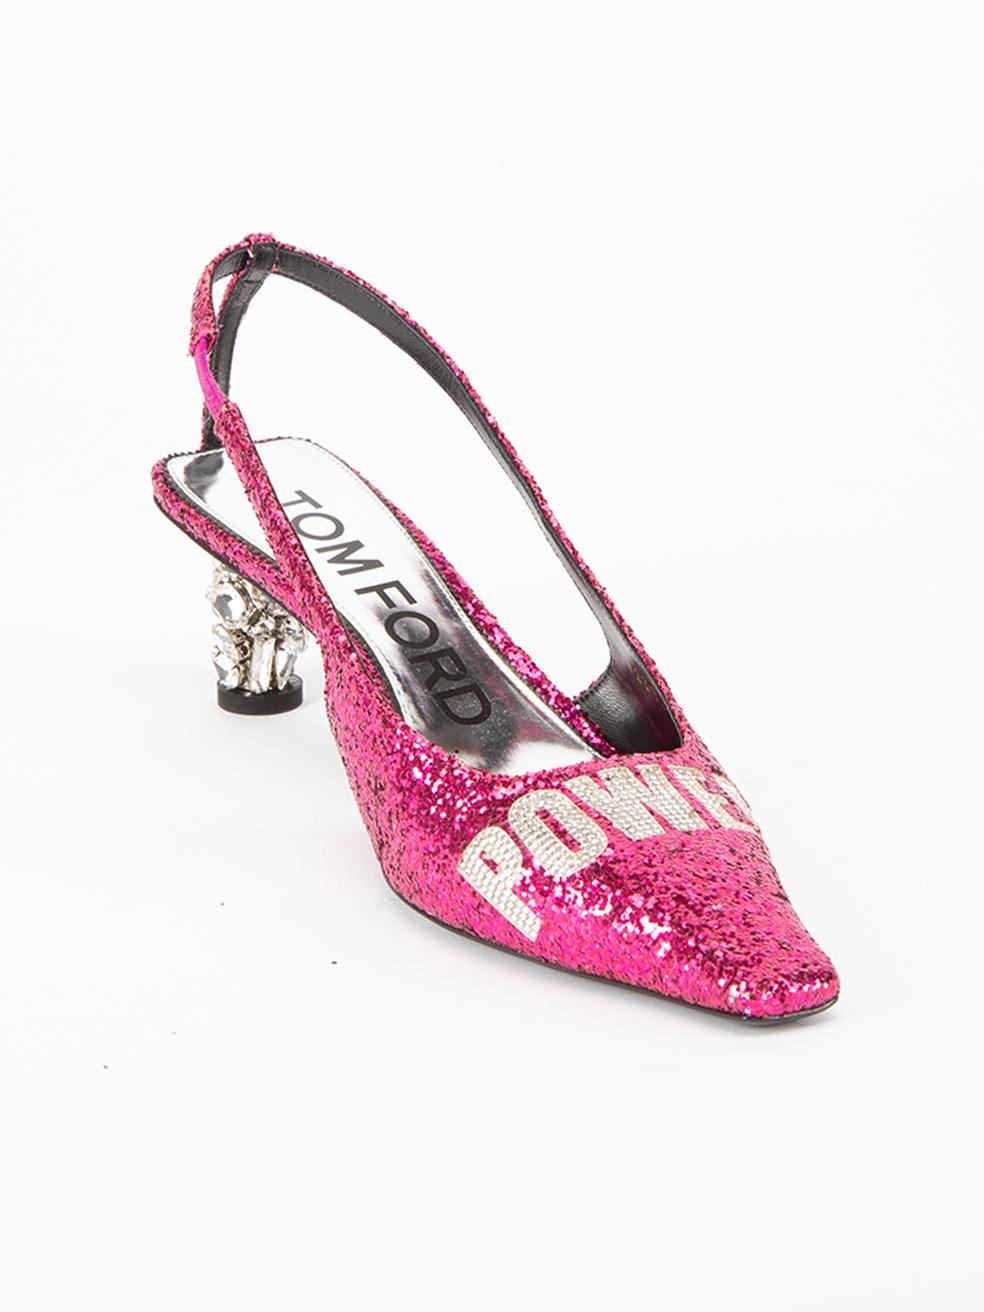 CONDITION is Never Worn. No visible wear to heels is evident on this used Tom Ford designer resale item. This item includes the original dustbag and shoebox.
 
 Details
  Pink
 Glitter
 Slip on heels
 Square toe
 Embellished mid heel
 Pussy Power